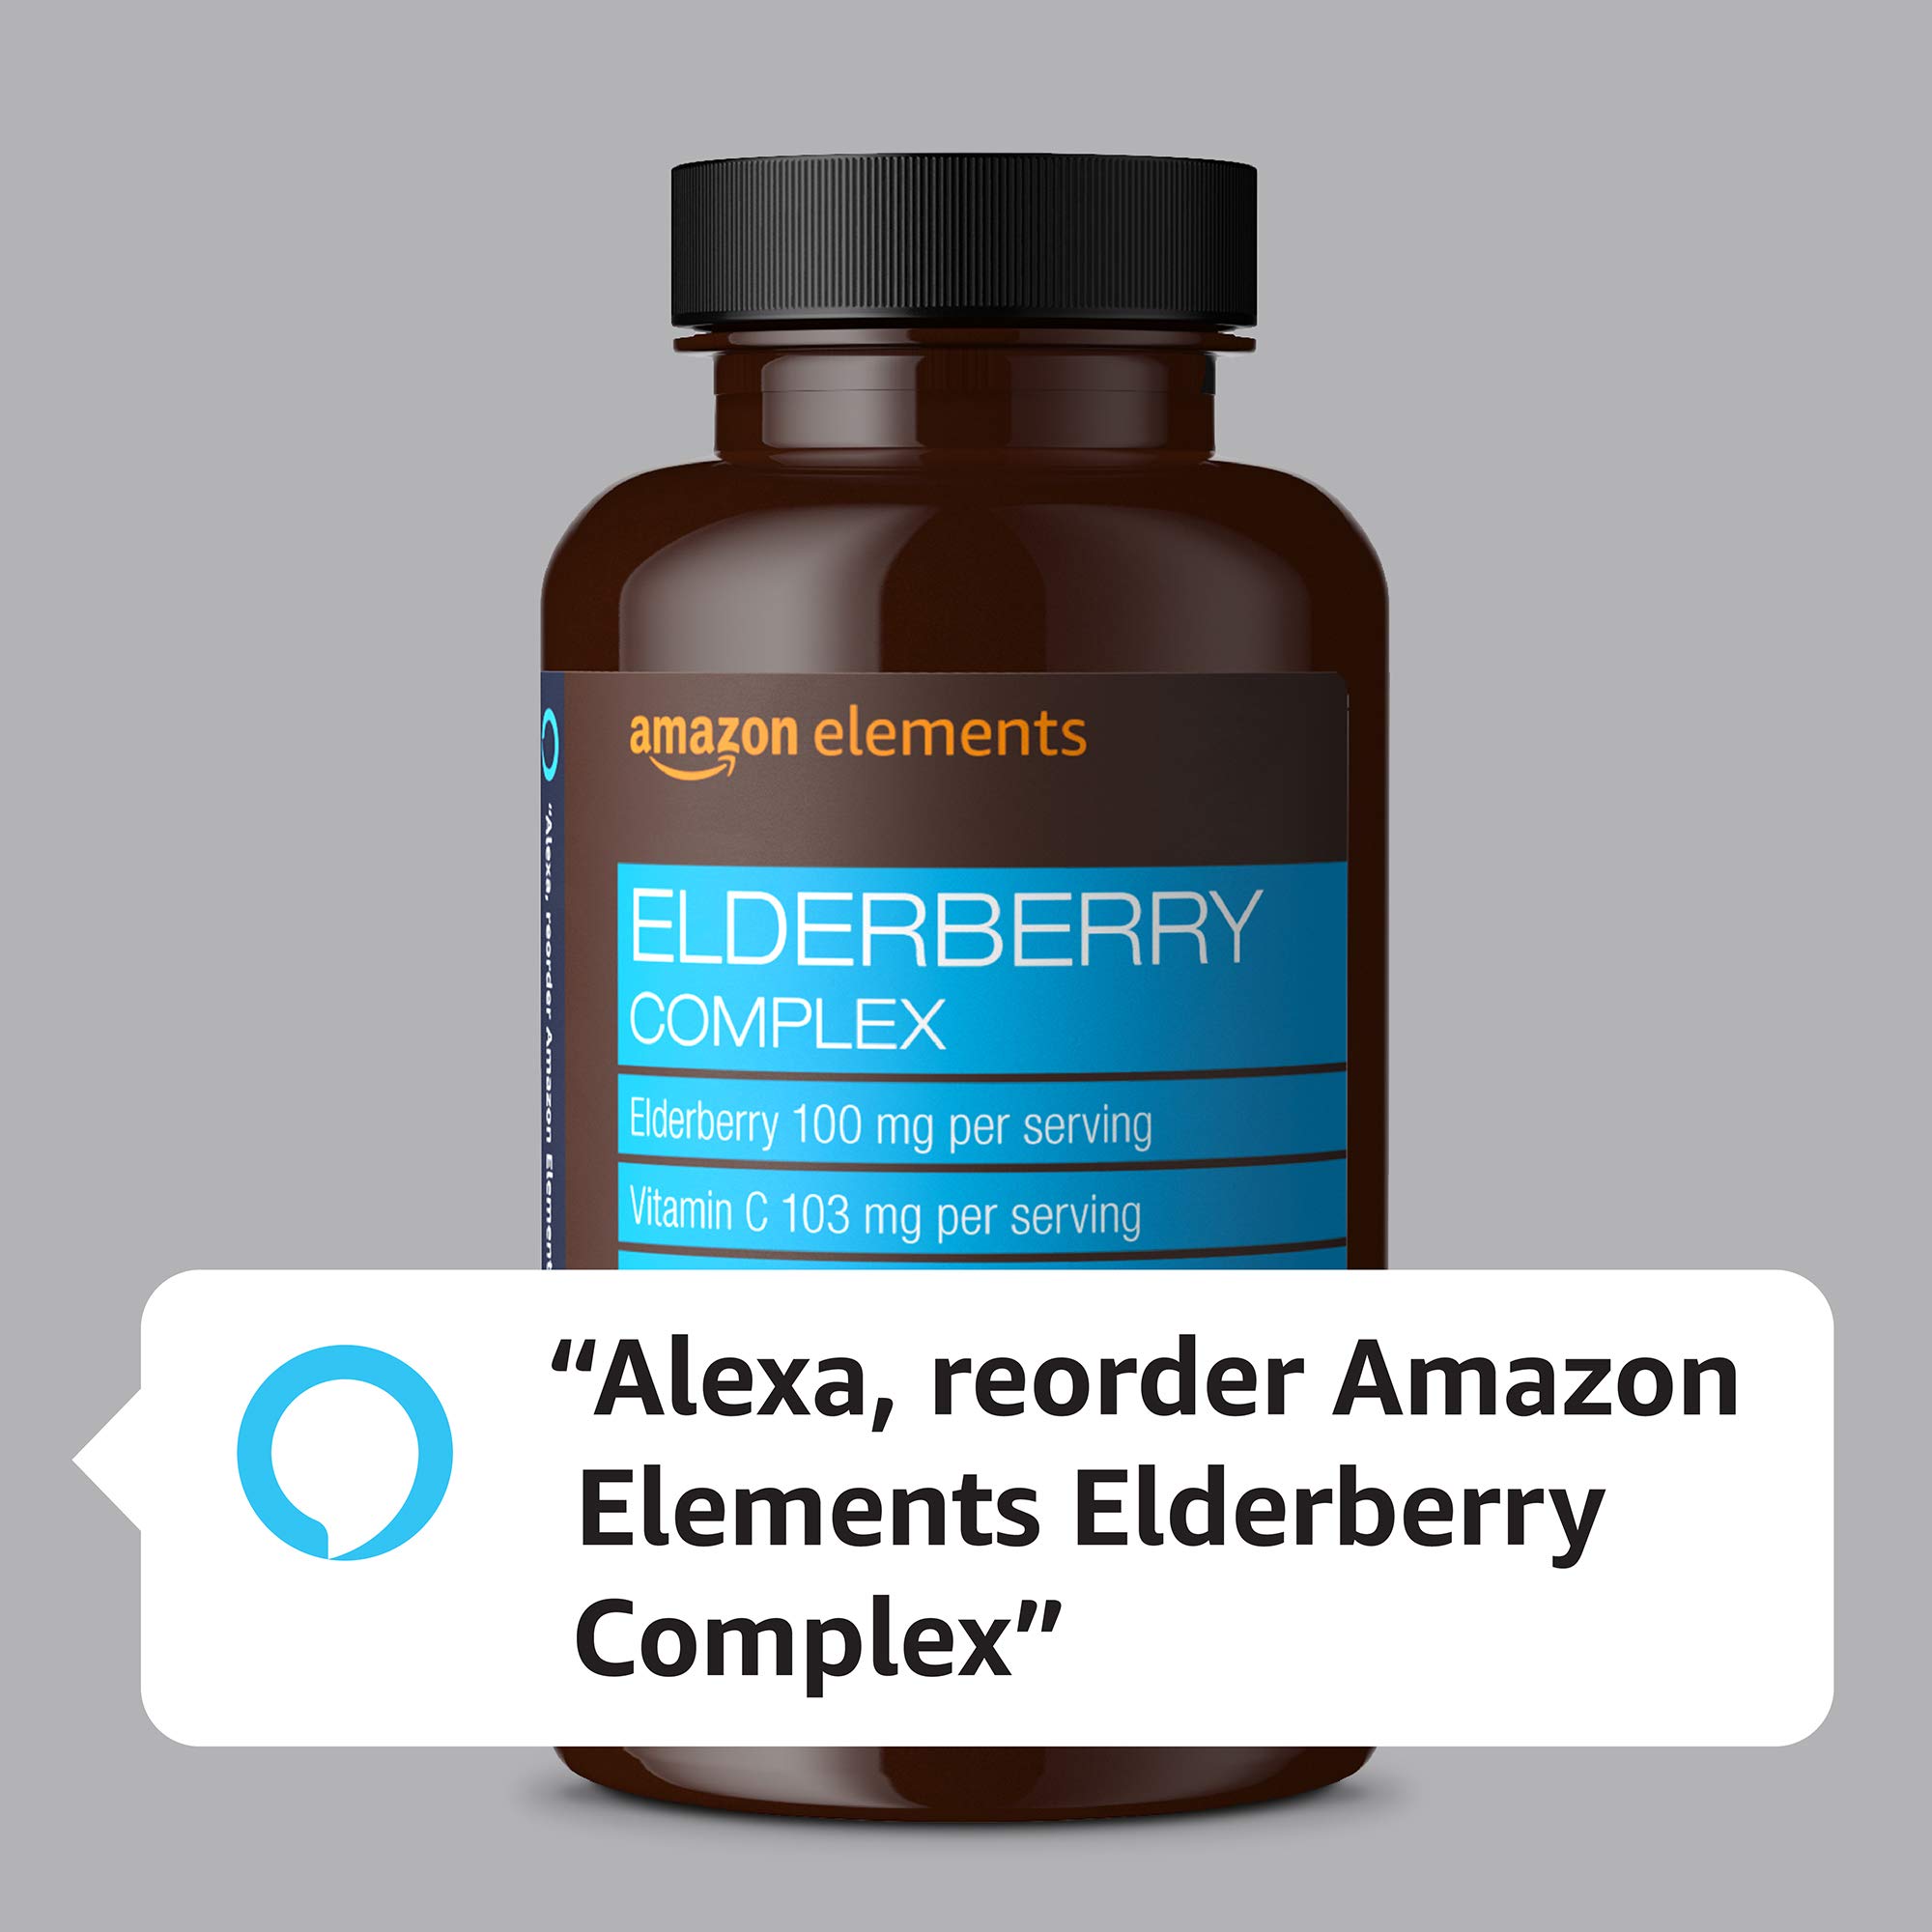 Amazon Elements Elderberry Complex, Immune System Support, Berry Flavored Lozenges, 60 Count, Elderberry 100mg, Vitamin C 103mg, Zinc 12mg per Serving (Packaging may vary)